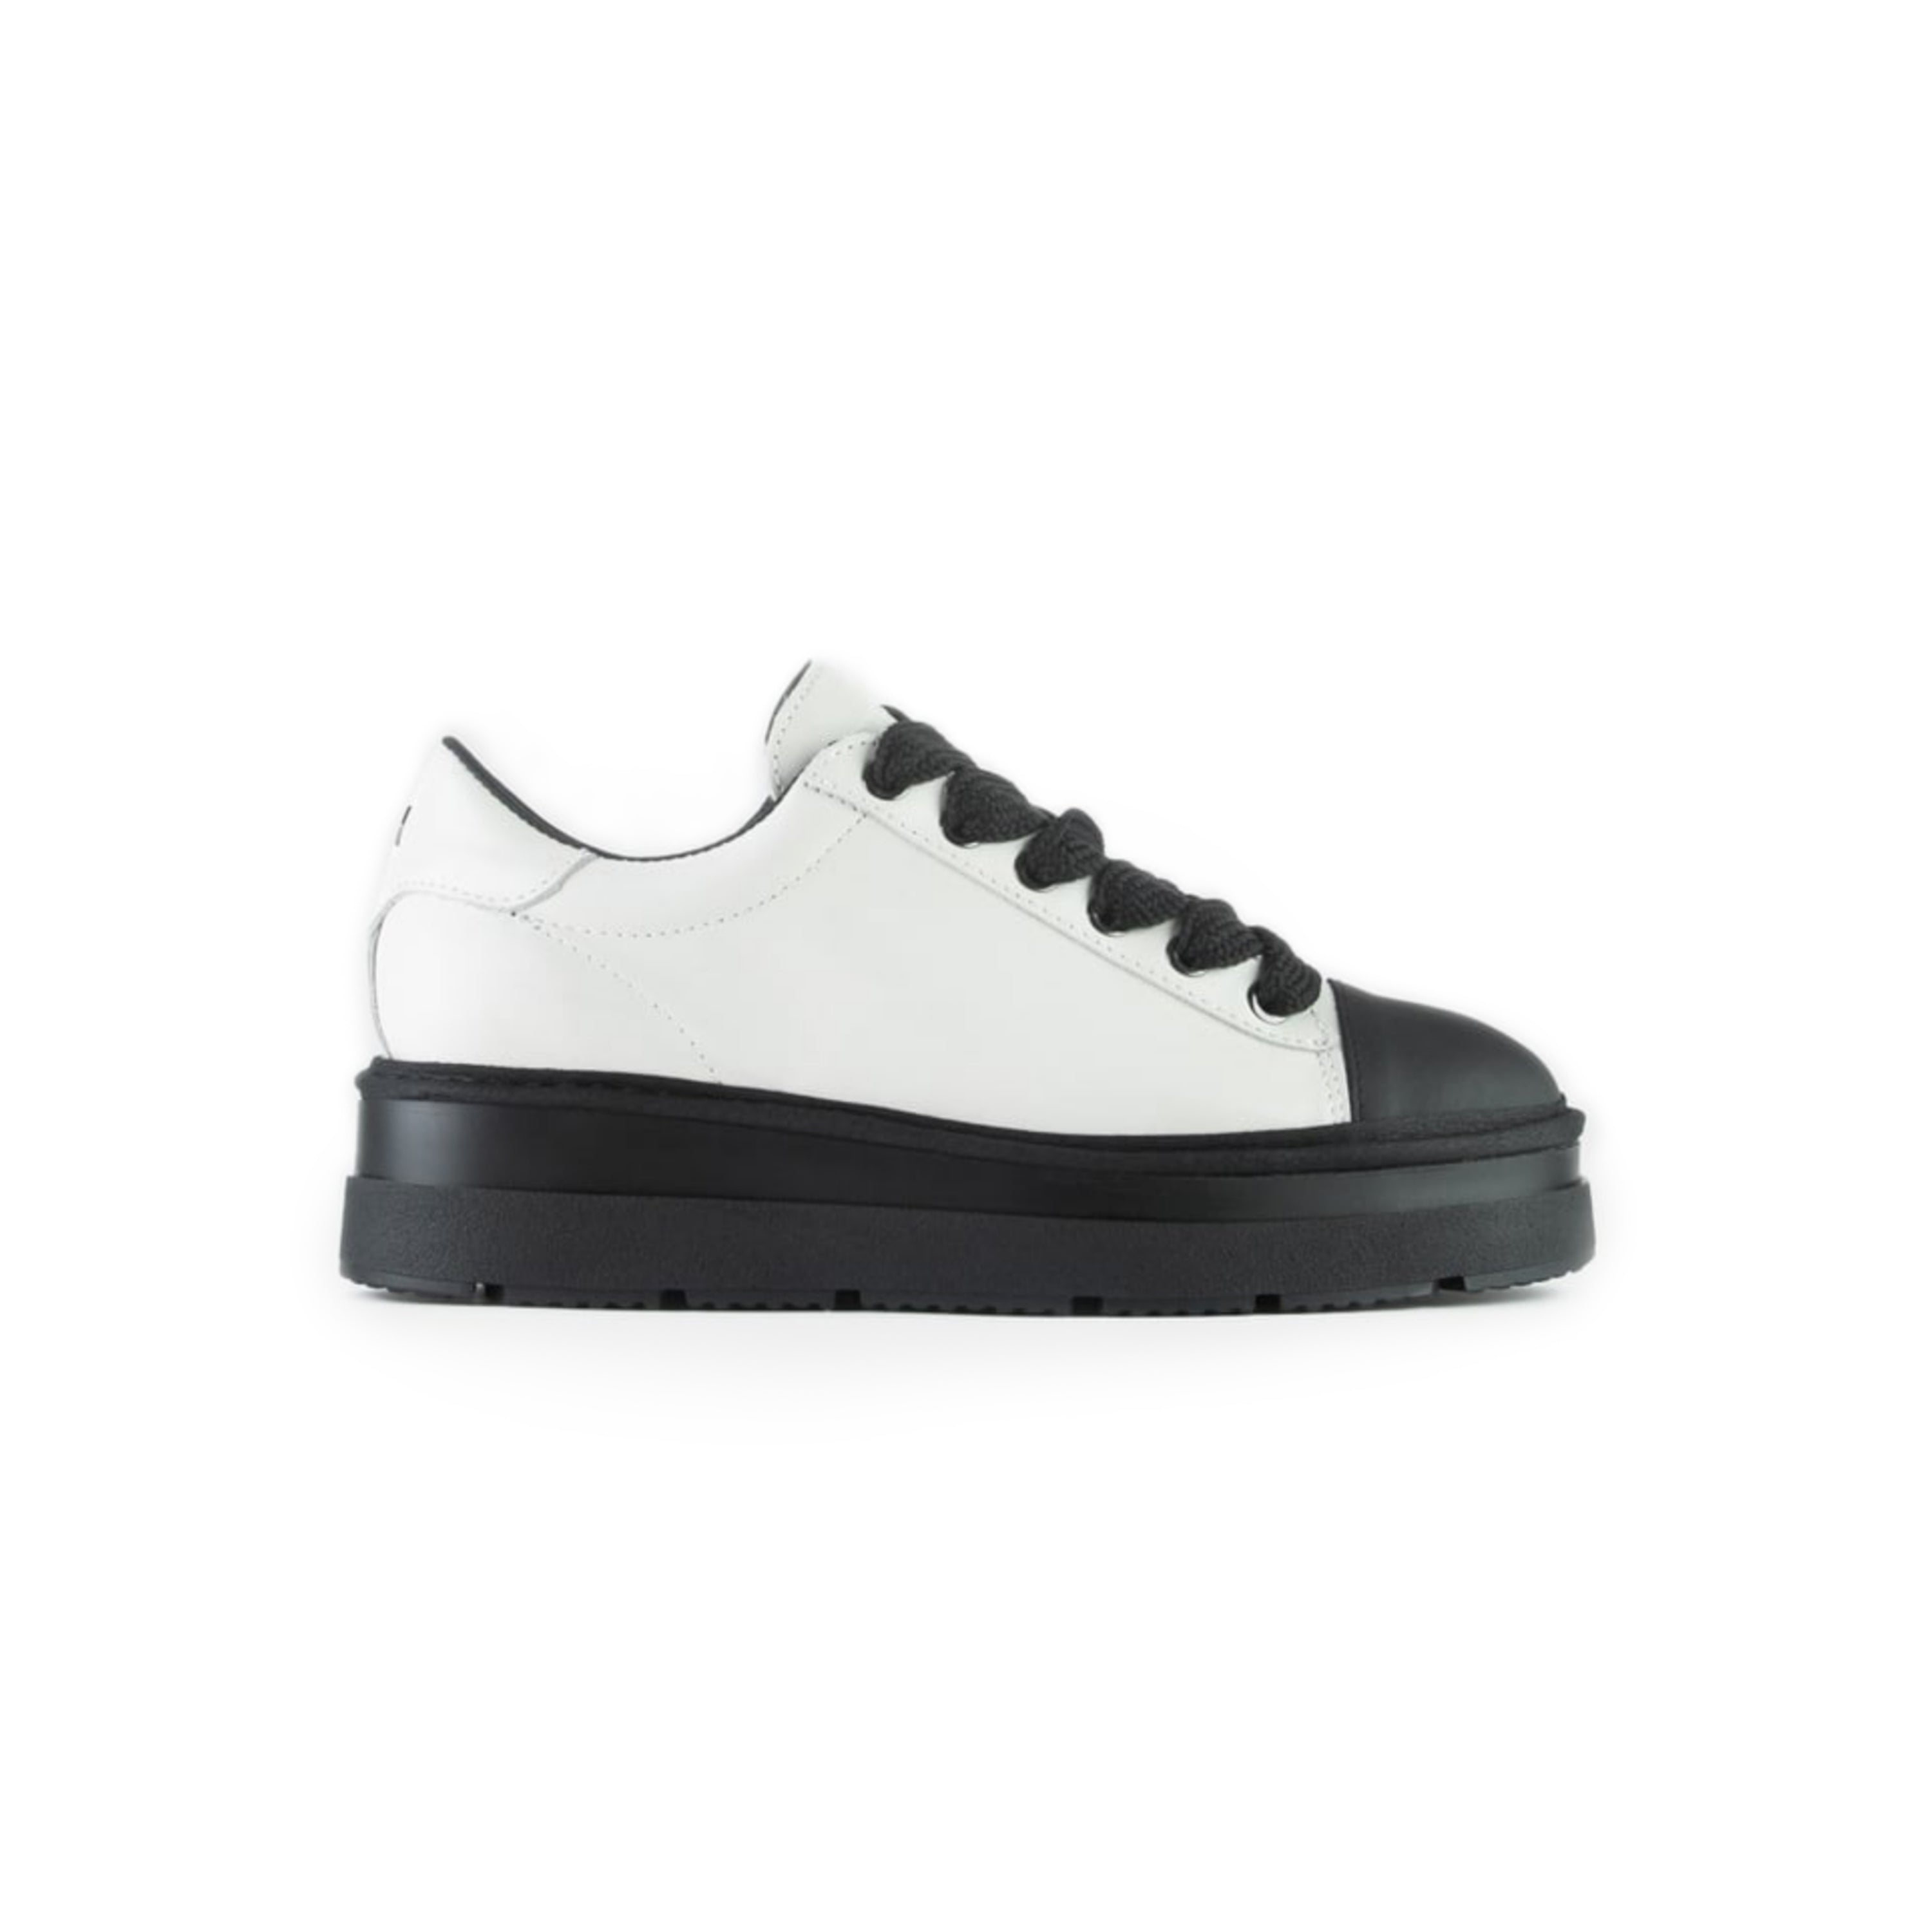 SNEAKERS PANCHIC P89 LACE UP PELLE IVORY